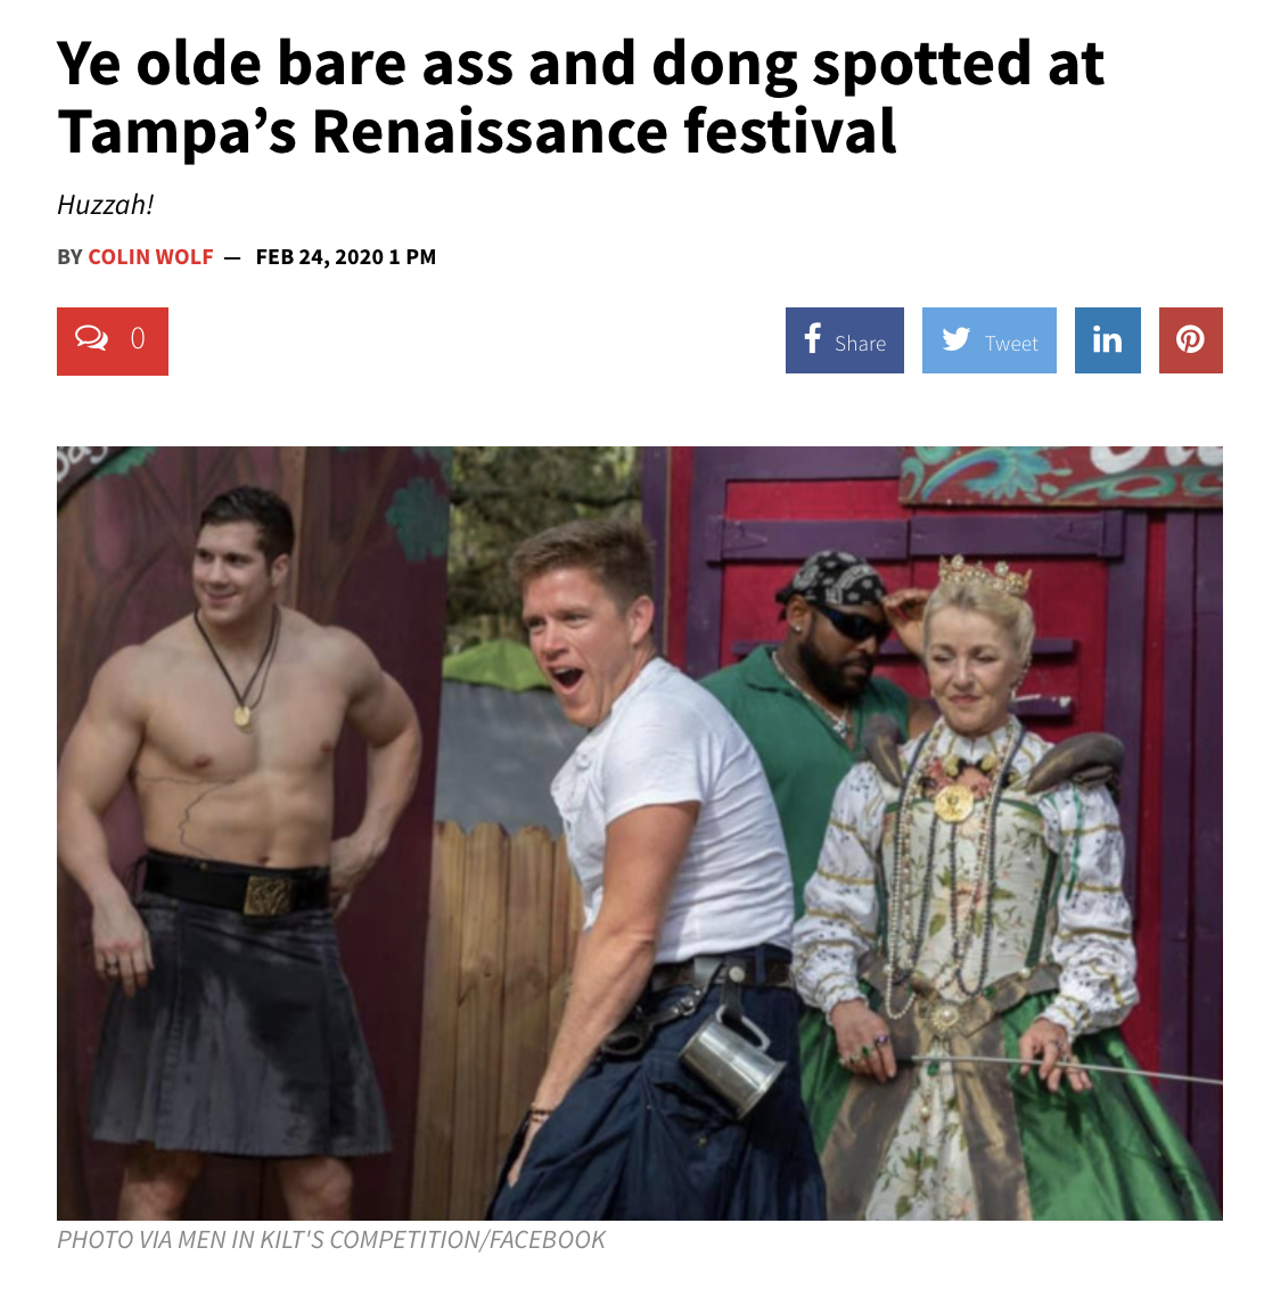 "As I'm filming, they're cheering and cheering, this one came around, swirled around, danced, then he bent over and lifted up his kilt and there's his backside saying hello. Everyone's cheering and cheering and shaking and then you're seeing other body parts shaking around from underneath there," Clermont resident Steve Treague told WTVT. Read More